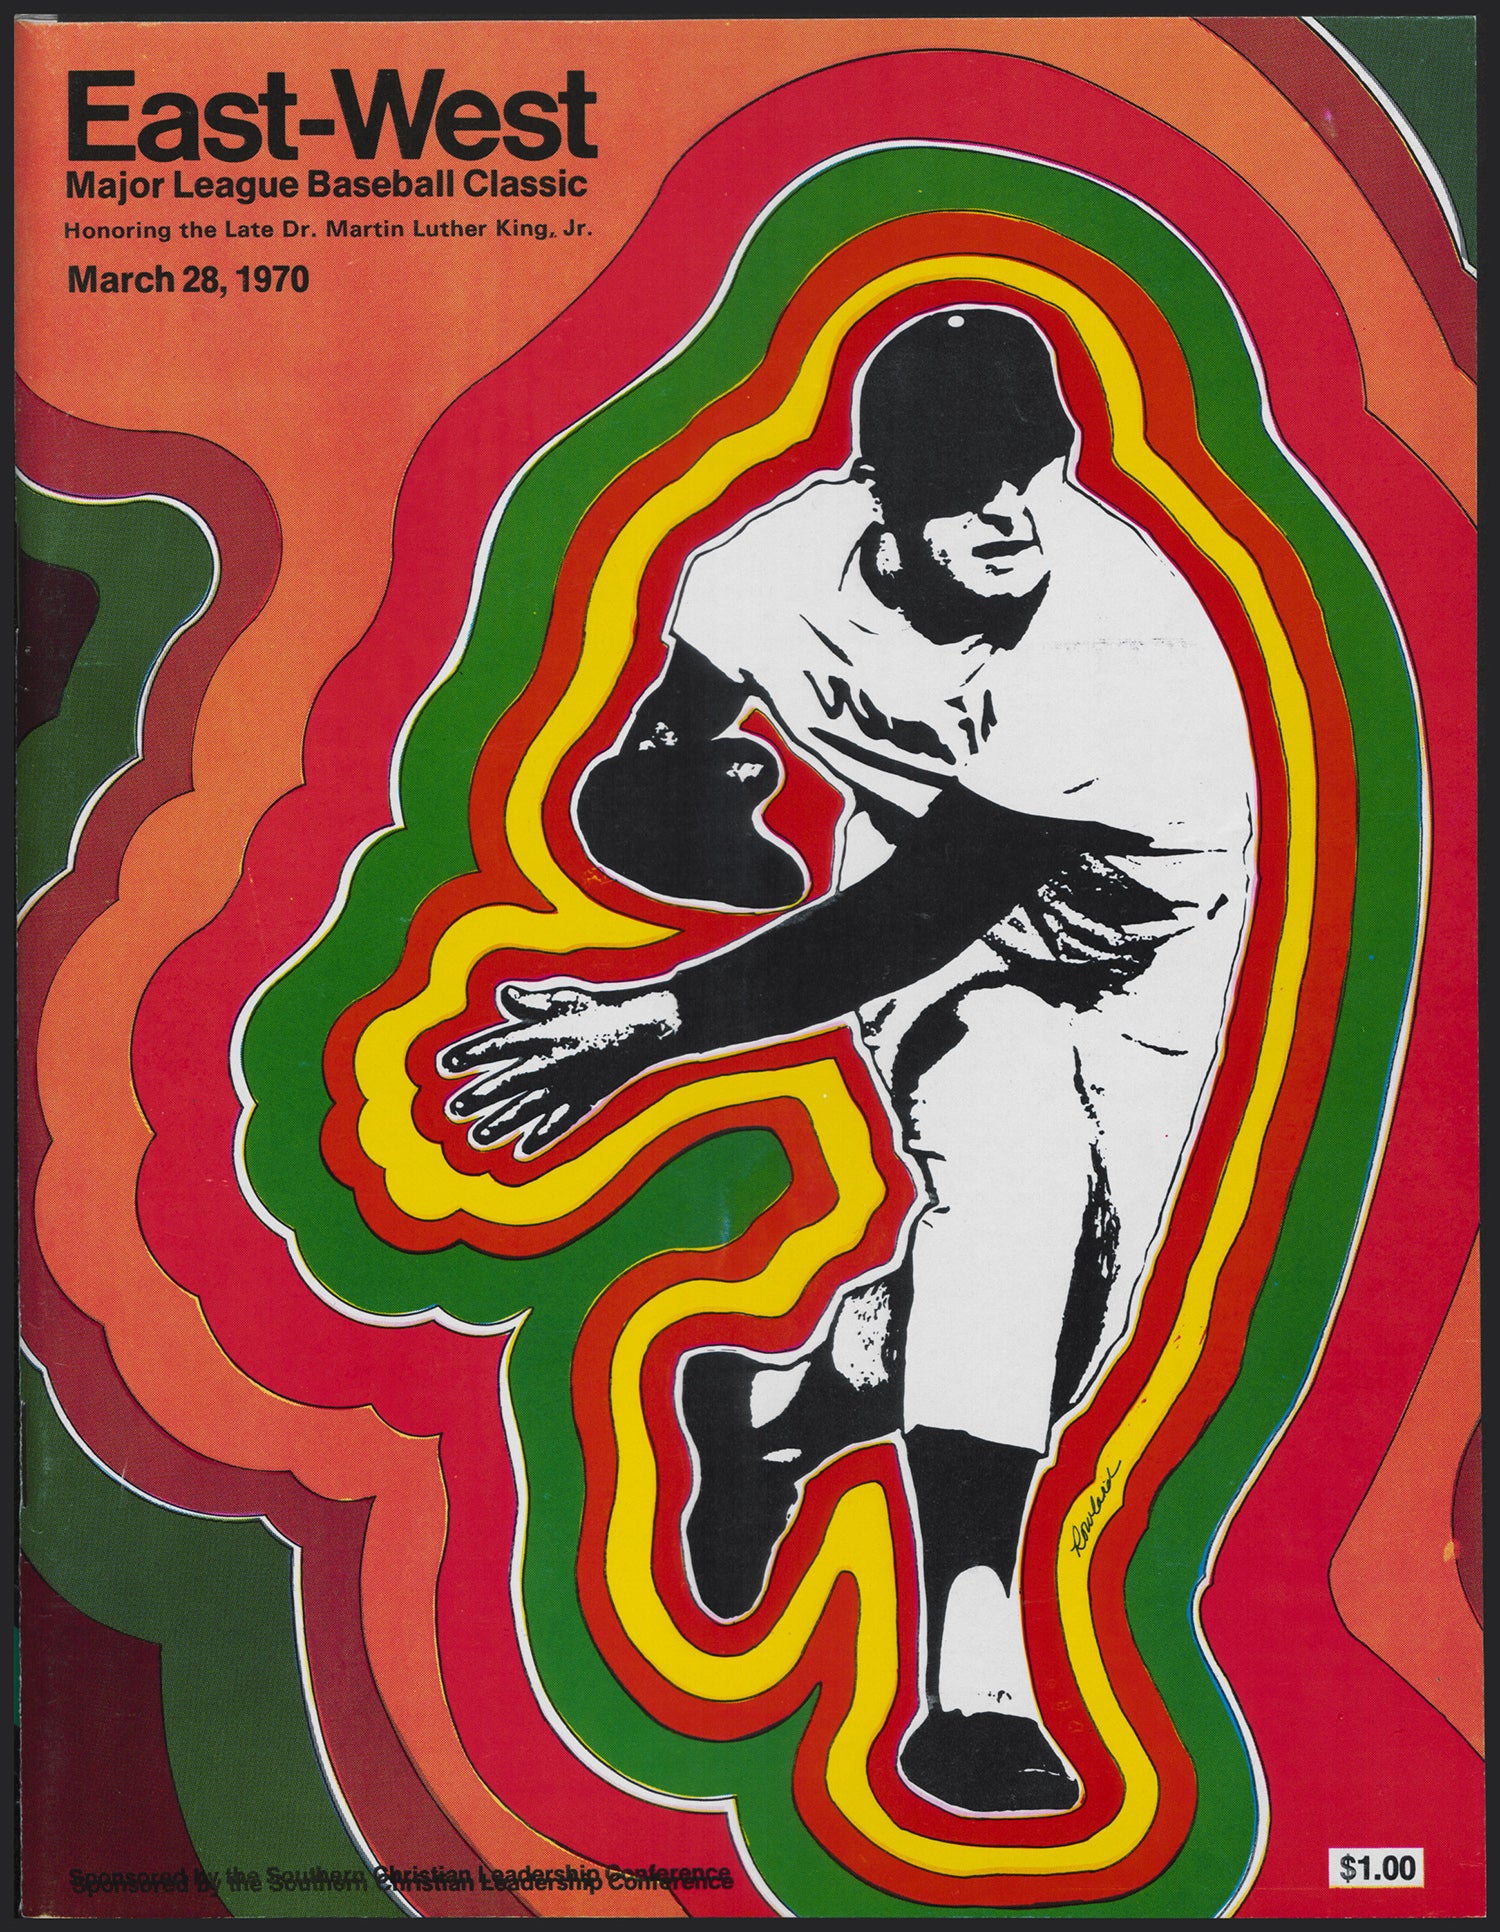 1970 game honored legacy of Martin Luther King Jr.